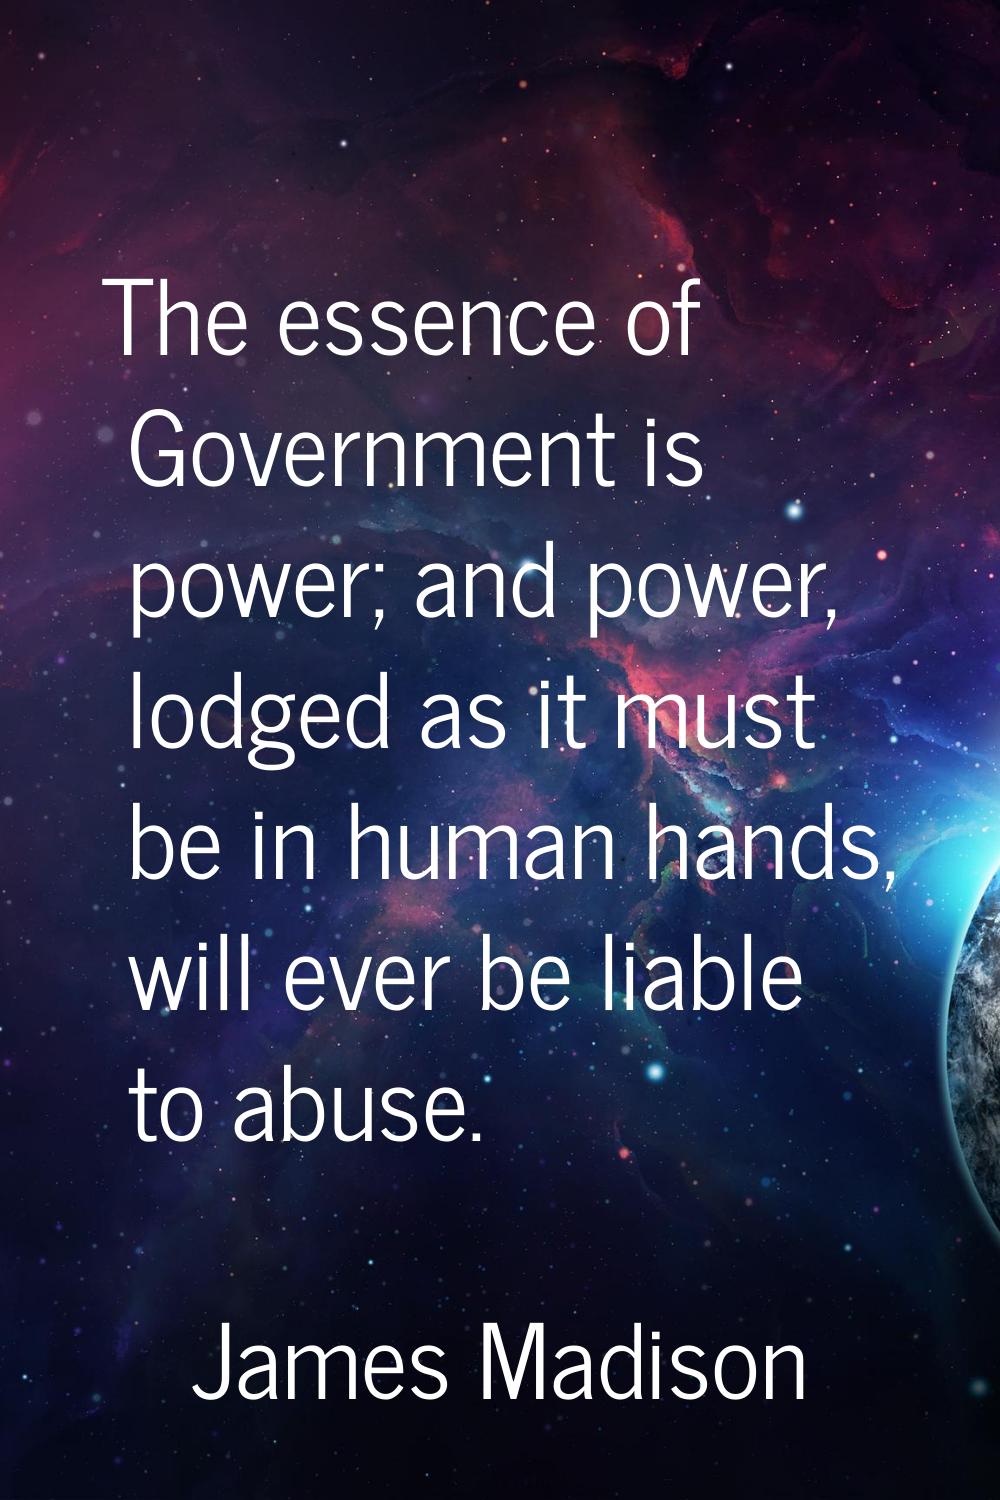 The essence of Government is power; and power, lodged as it must be in human hands, will ever be li